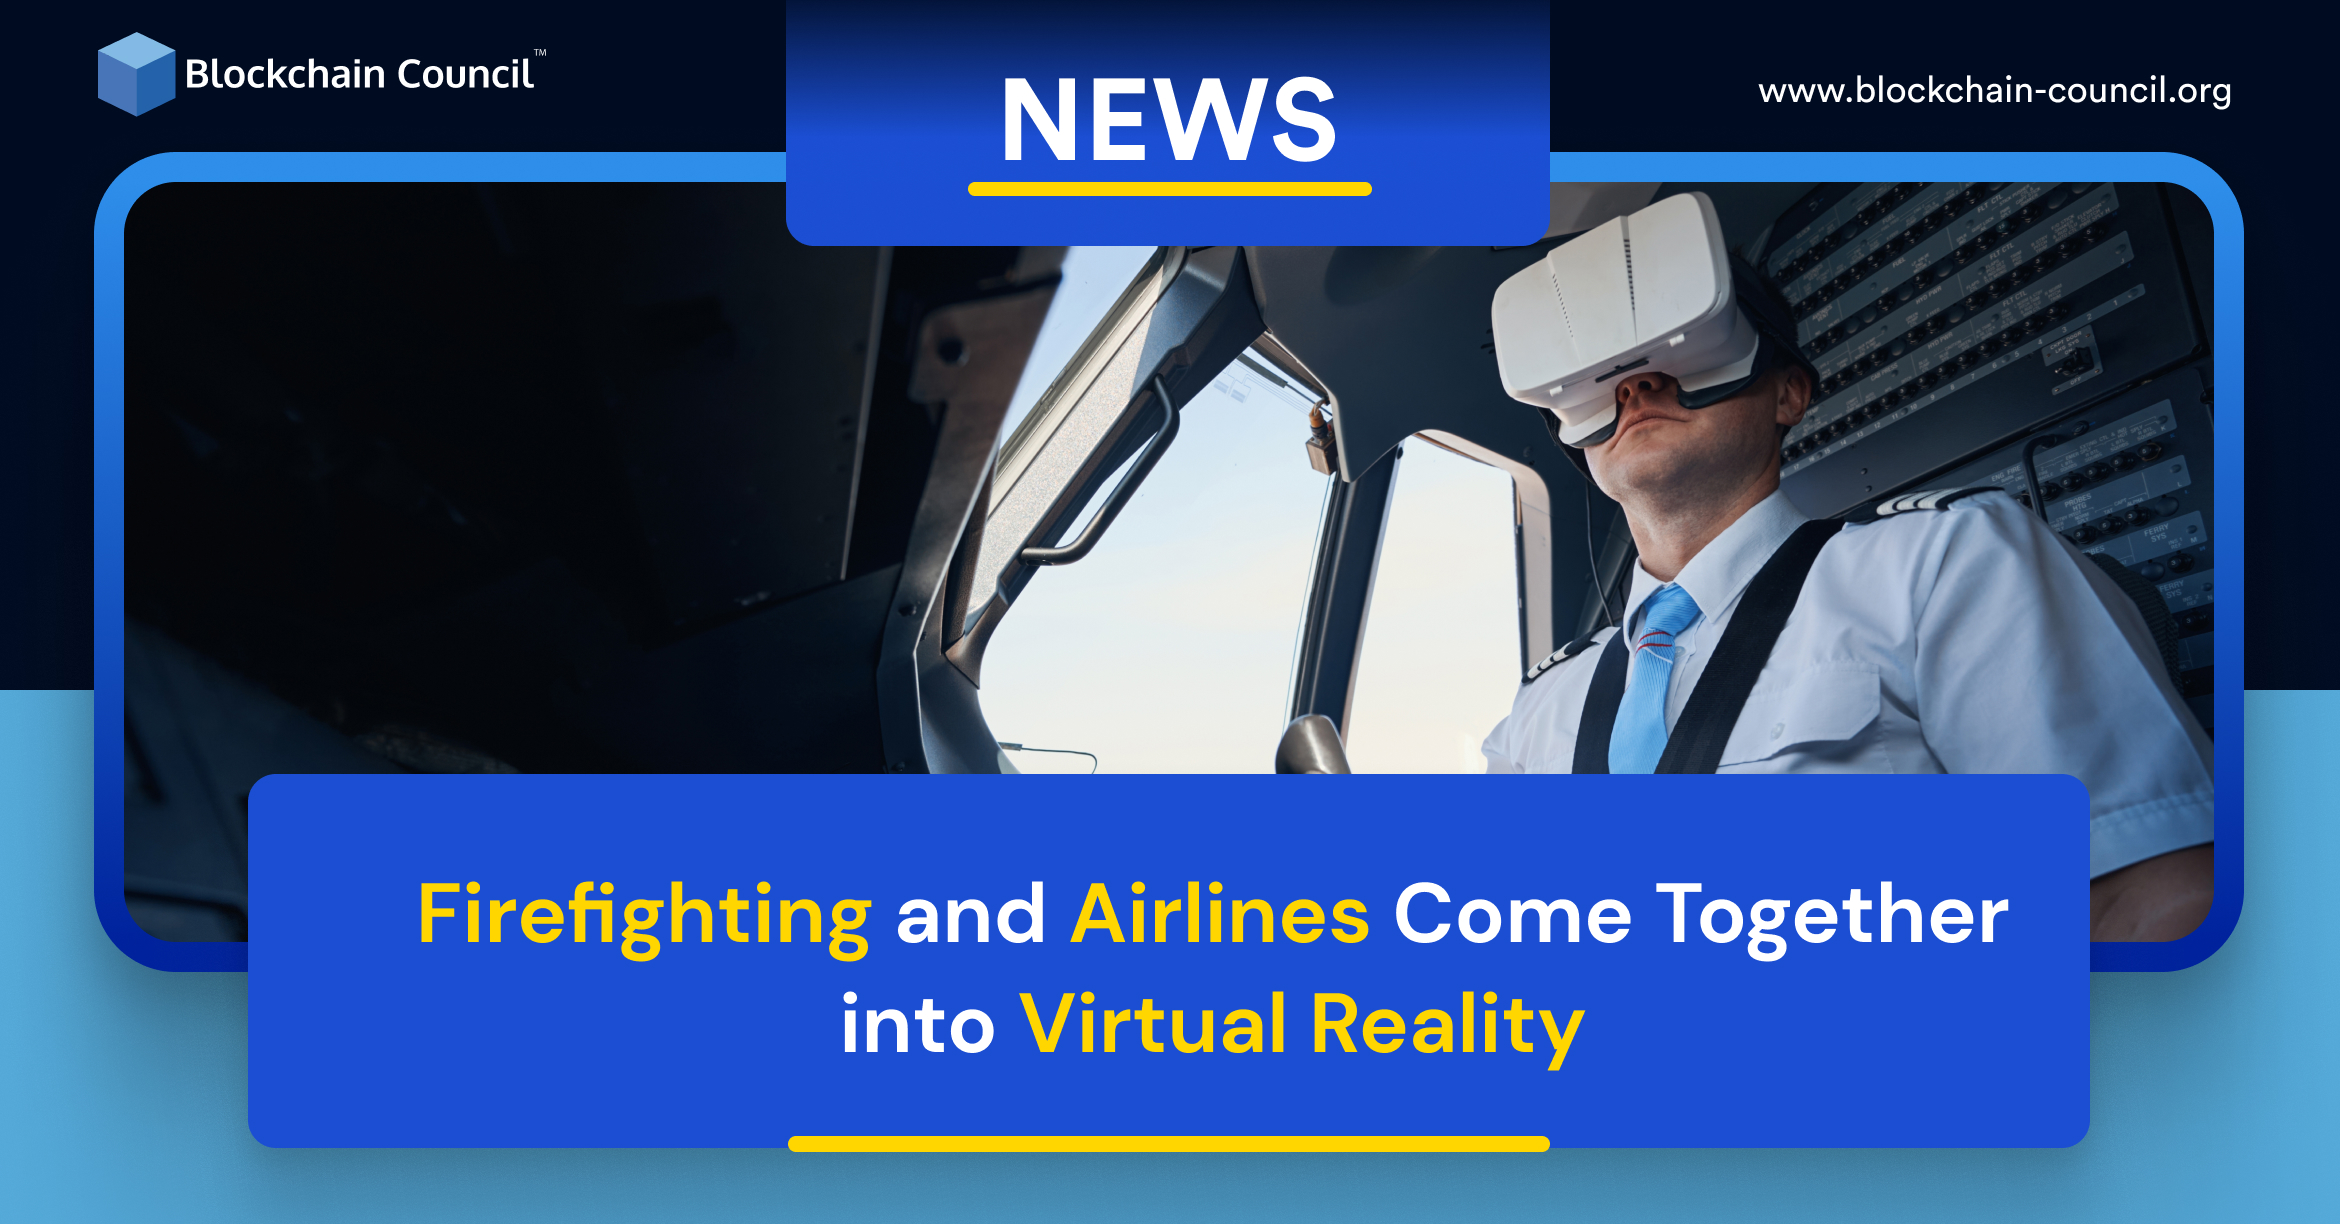 Firefighting and Airlines Come Together into Virtual Reality